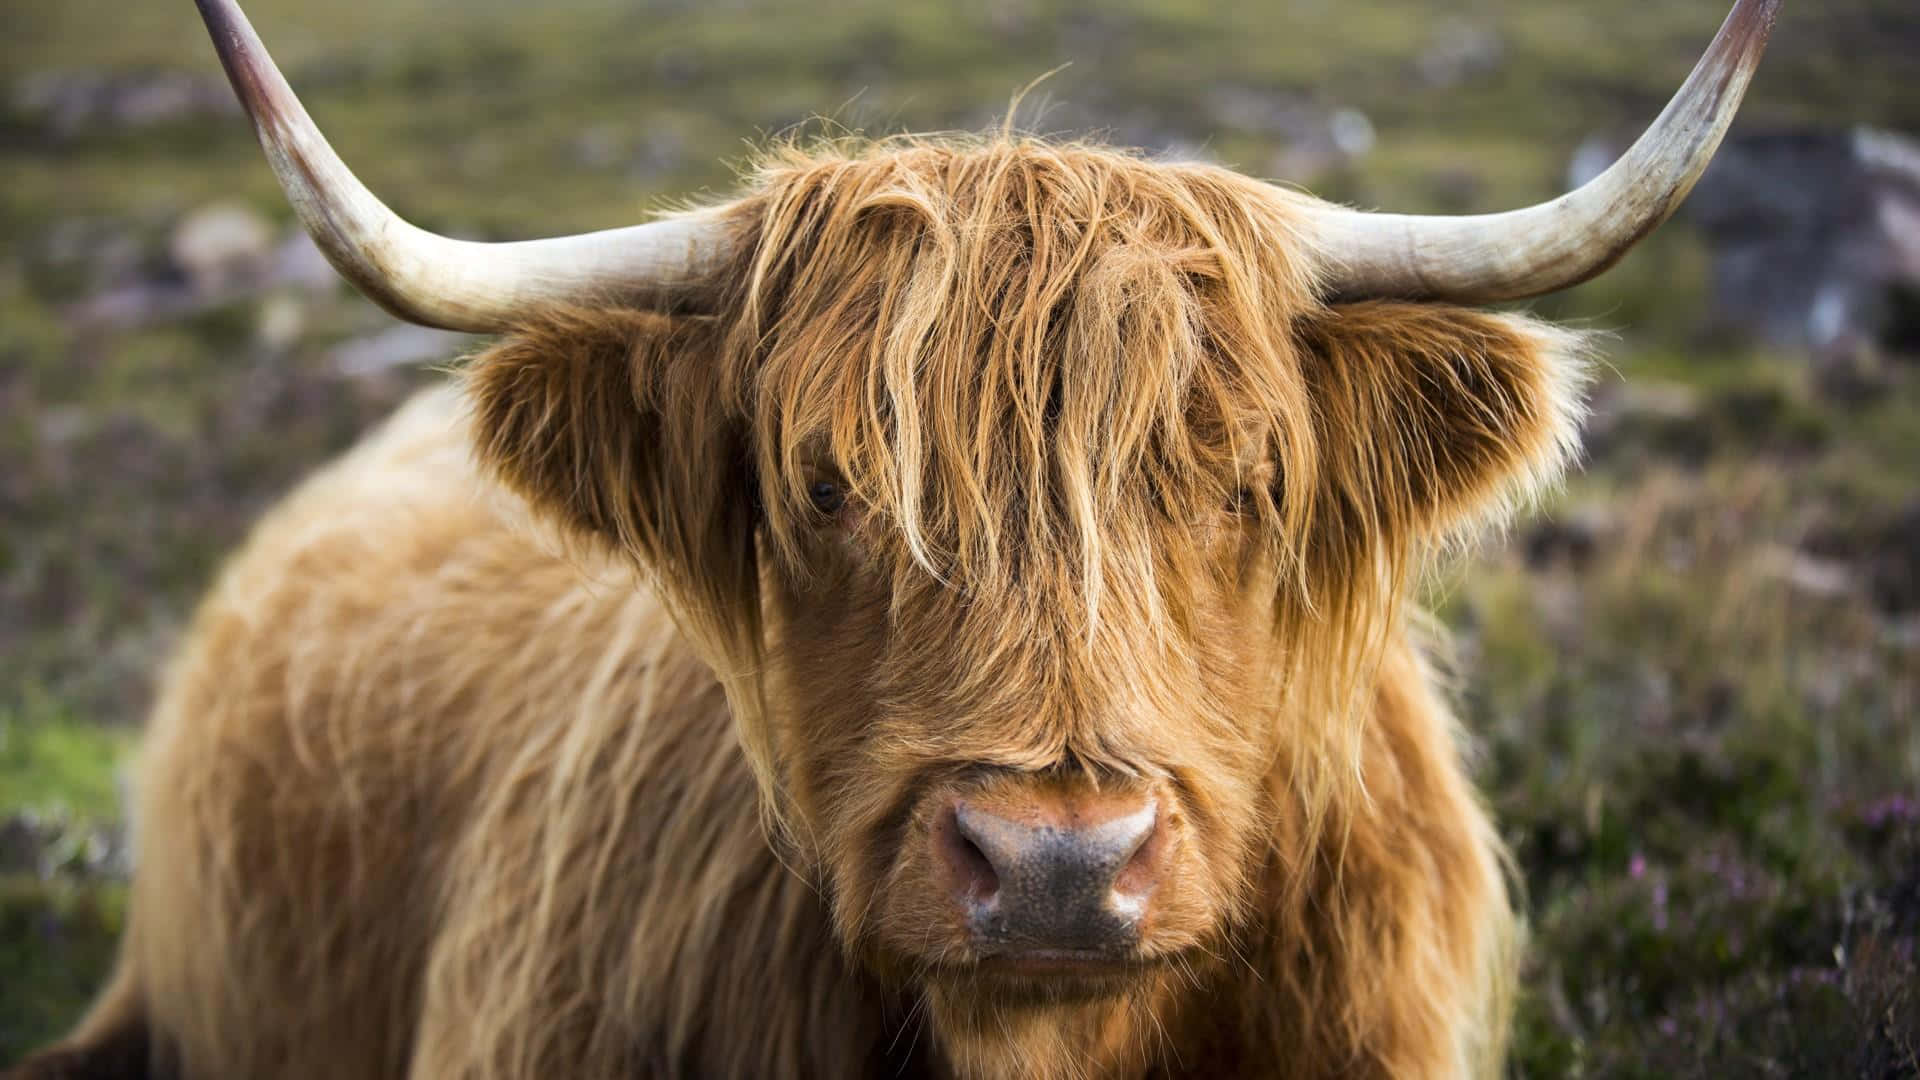 Majestic Highland Cow in the Countryside